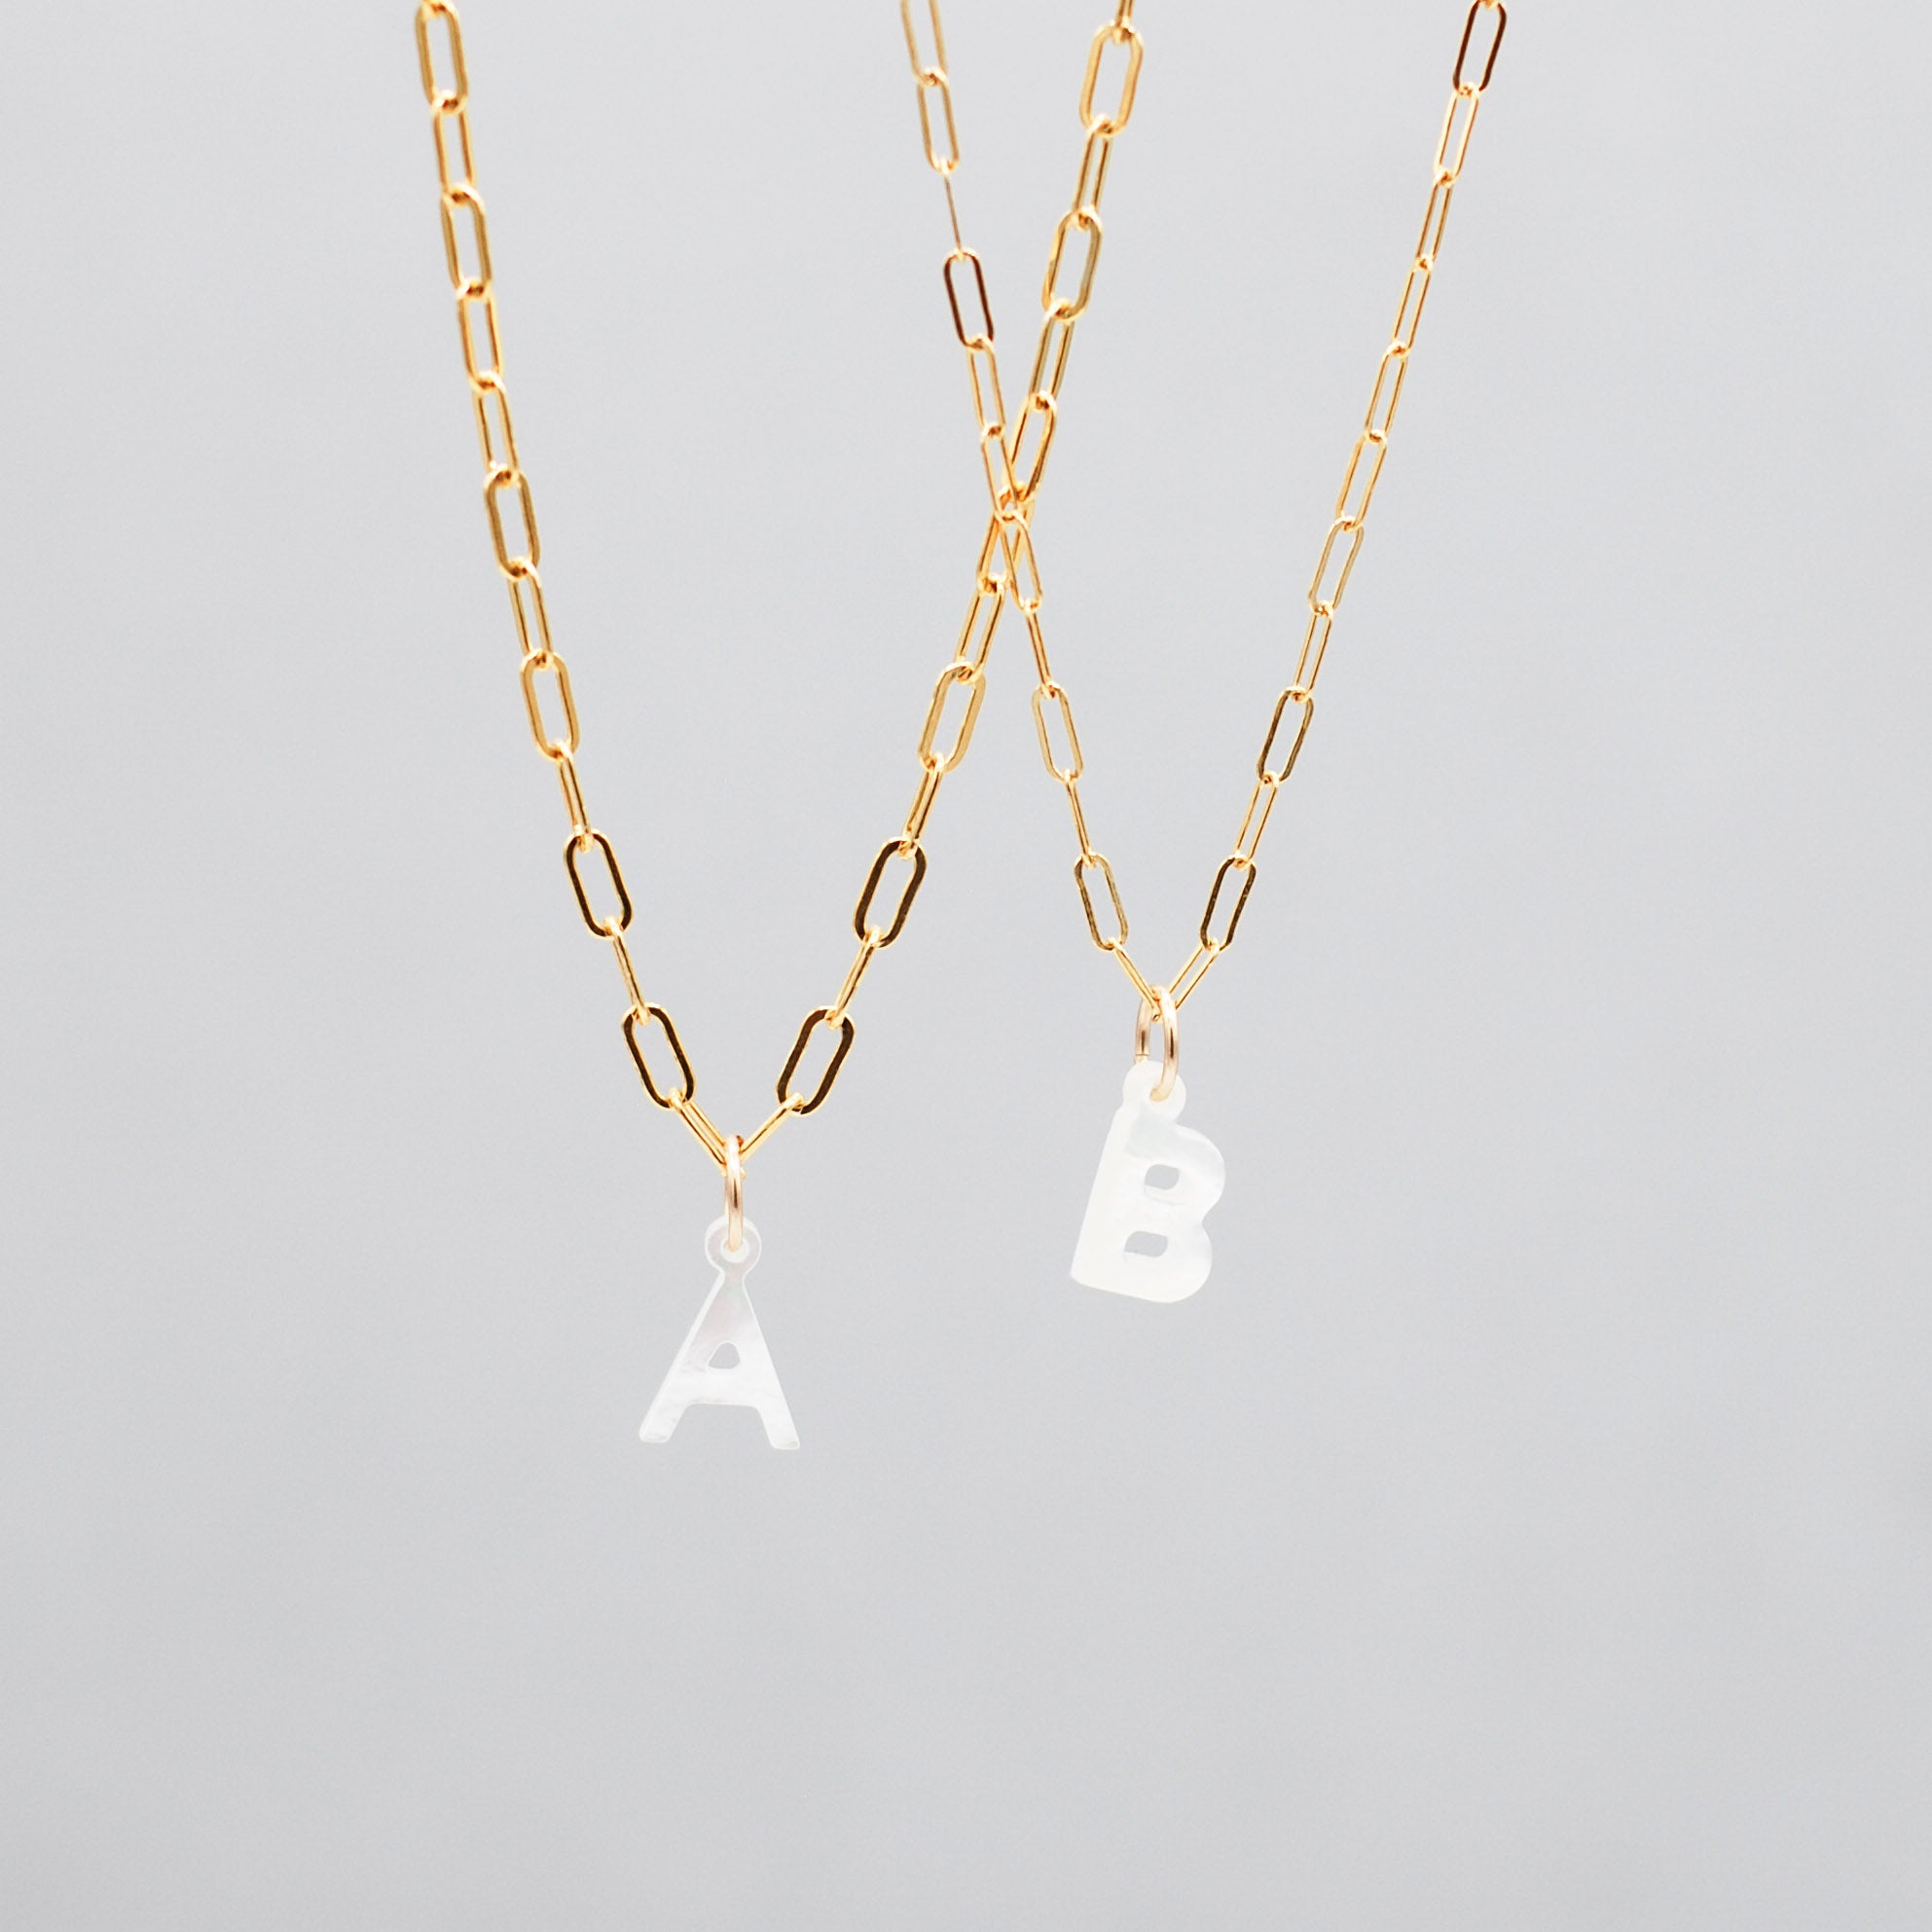 14k Gold Filled Initial Charm Necklace